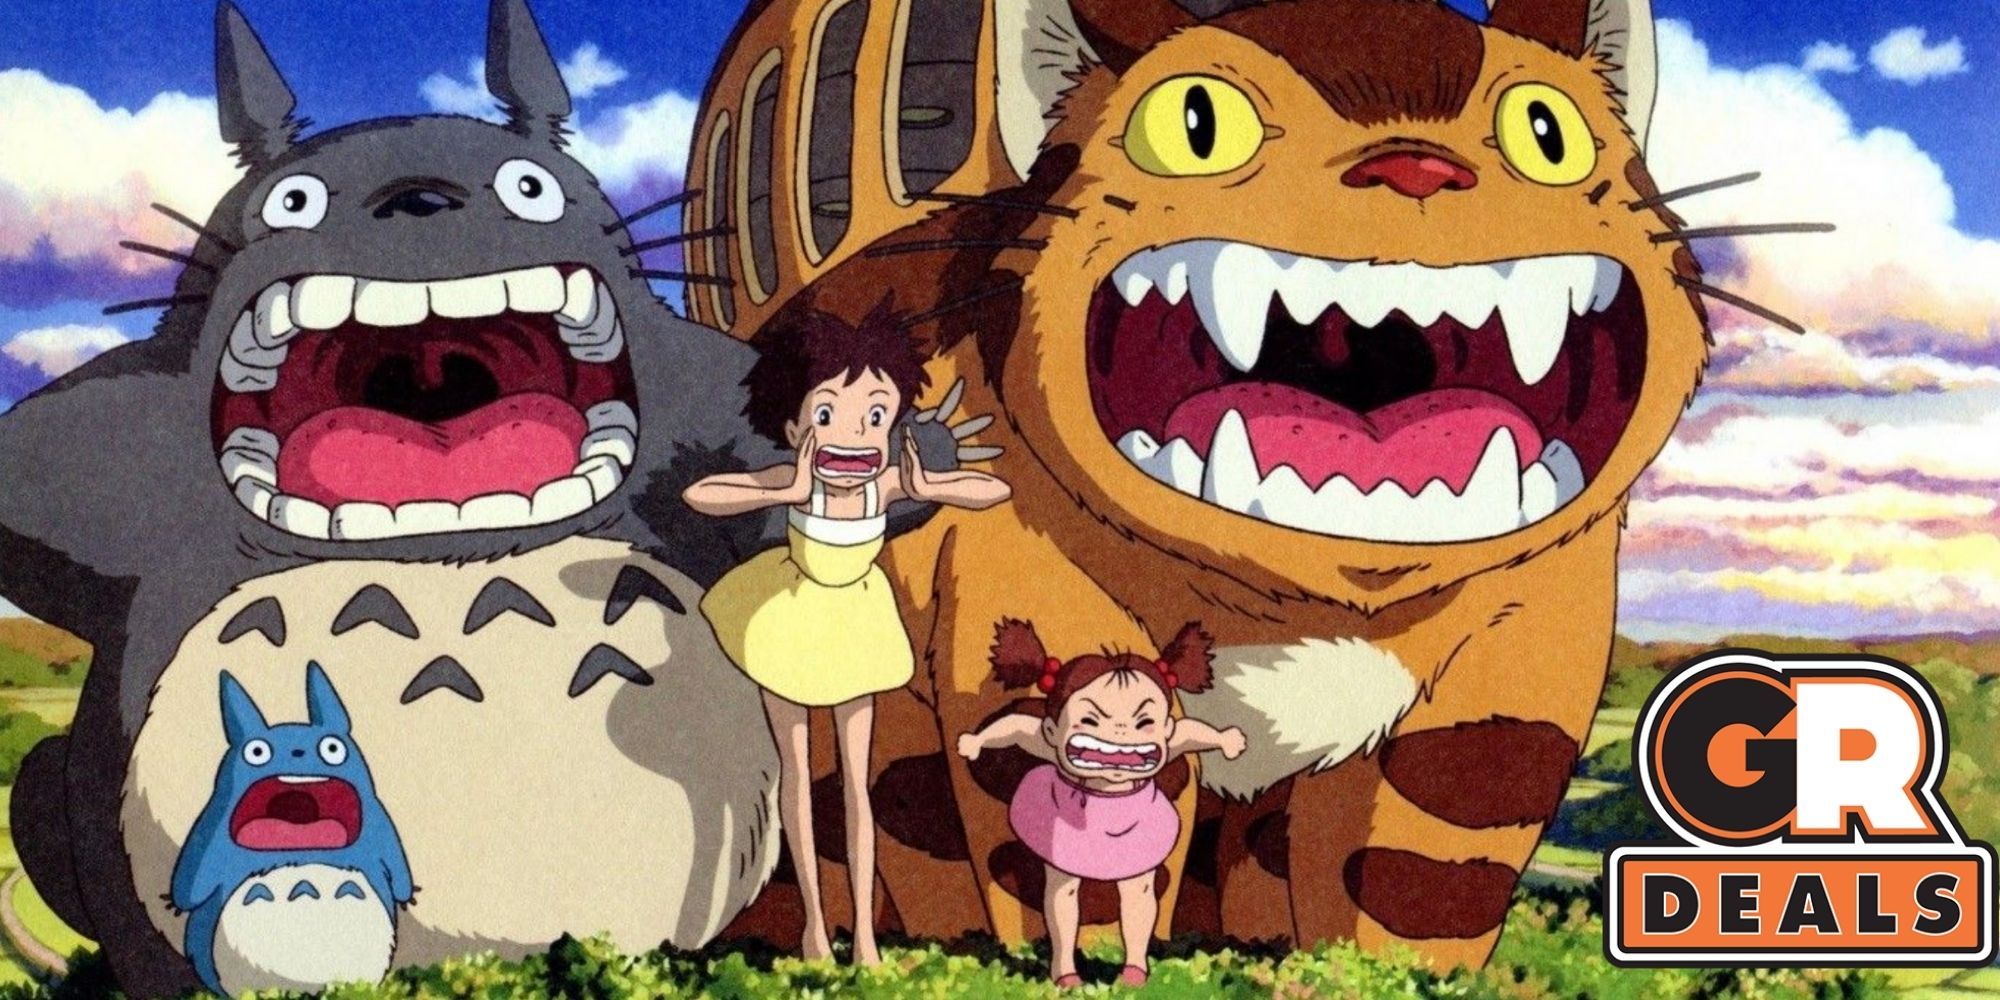 Ghibli Toroto Feature Image for Deals post